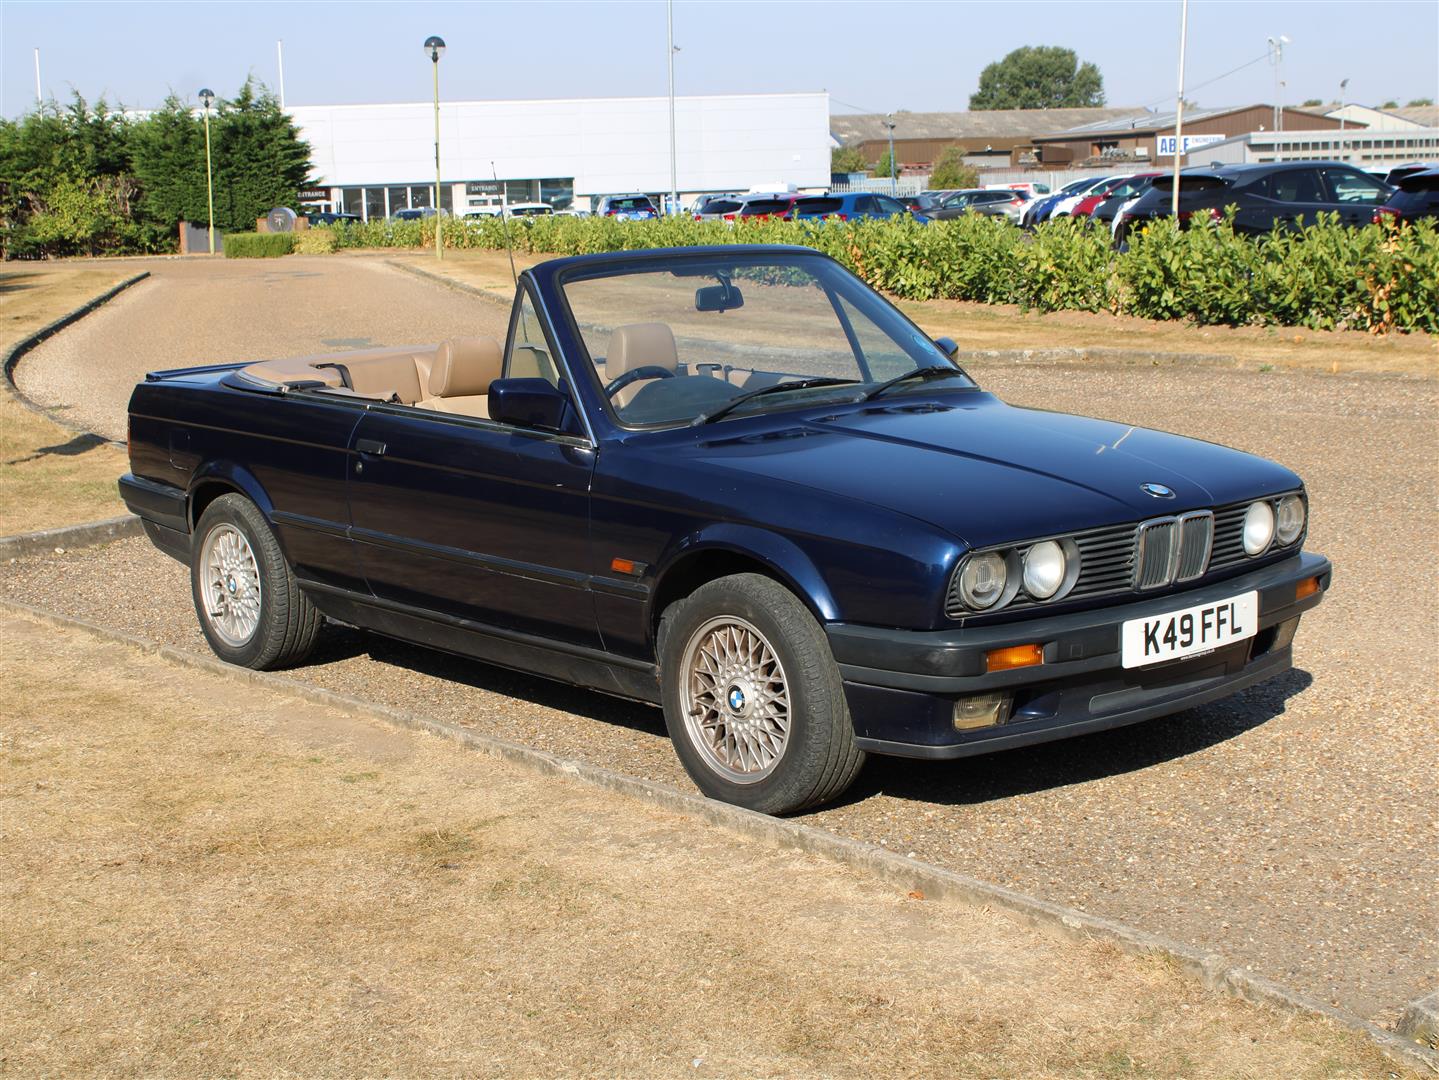 1993 BMW E30 318i Lux Convertible - Image 24 of 26